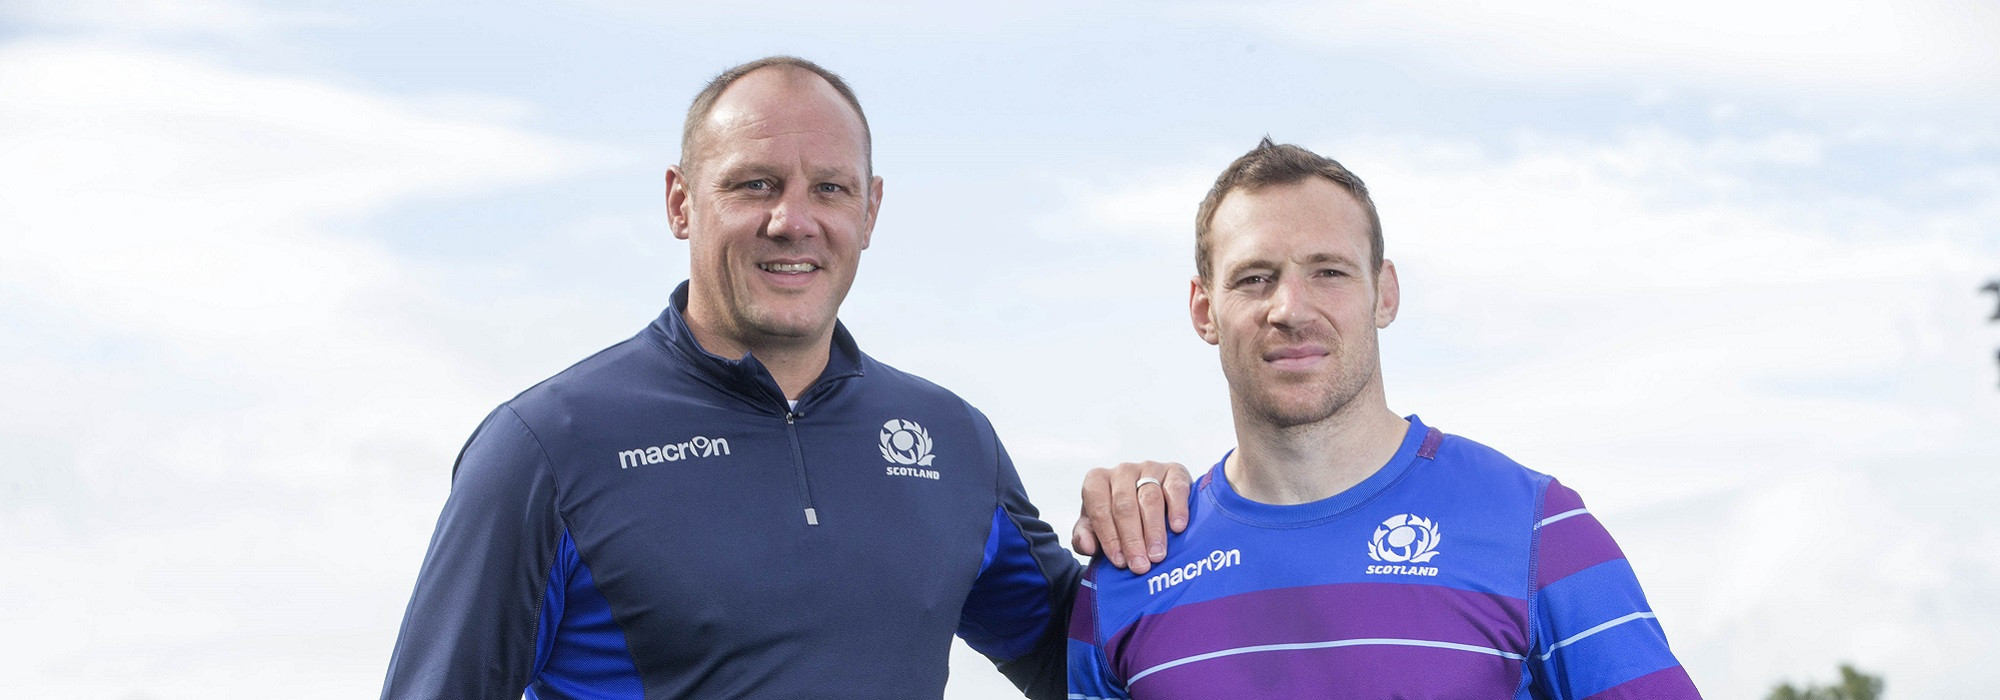 Scotland name rugby sevens team for Gold Coast 2018 Commonwealth Games